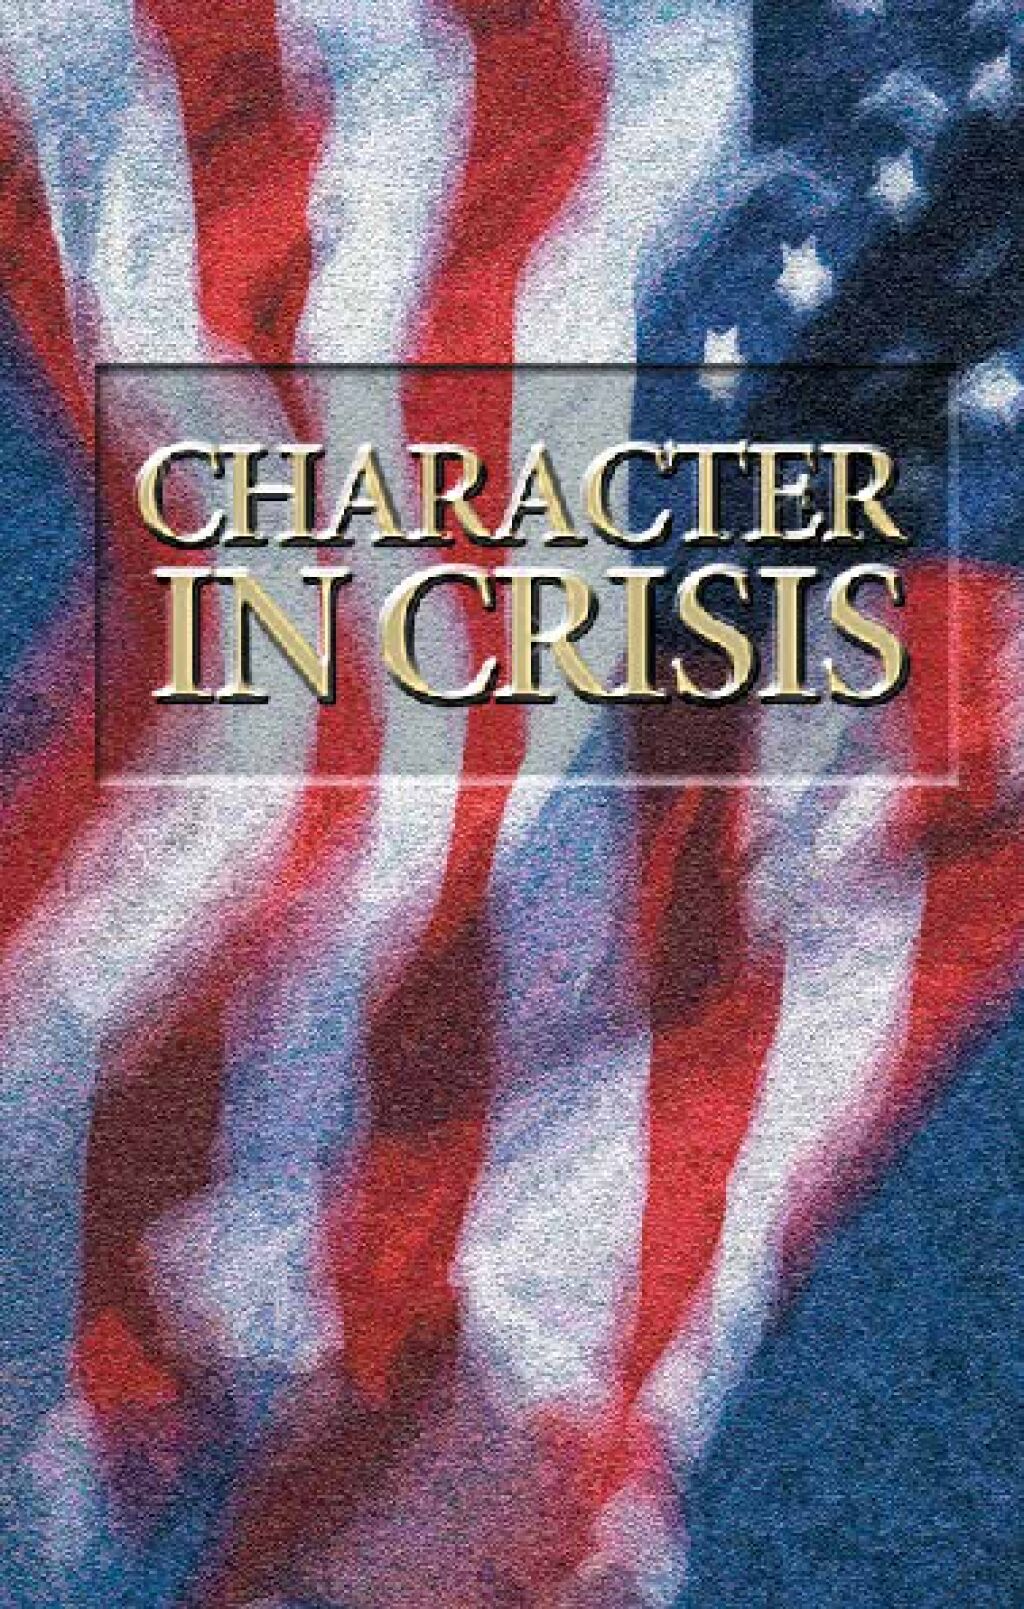 Character in Crisis | theTrumpet.com